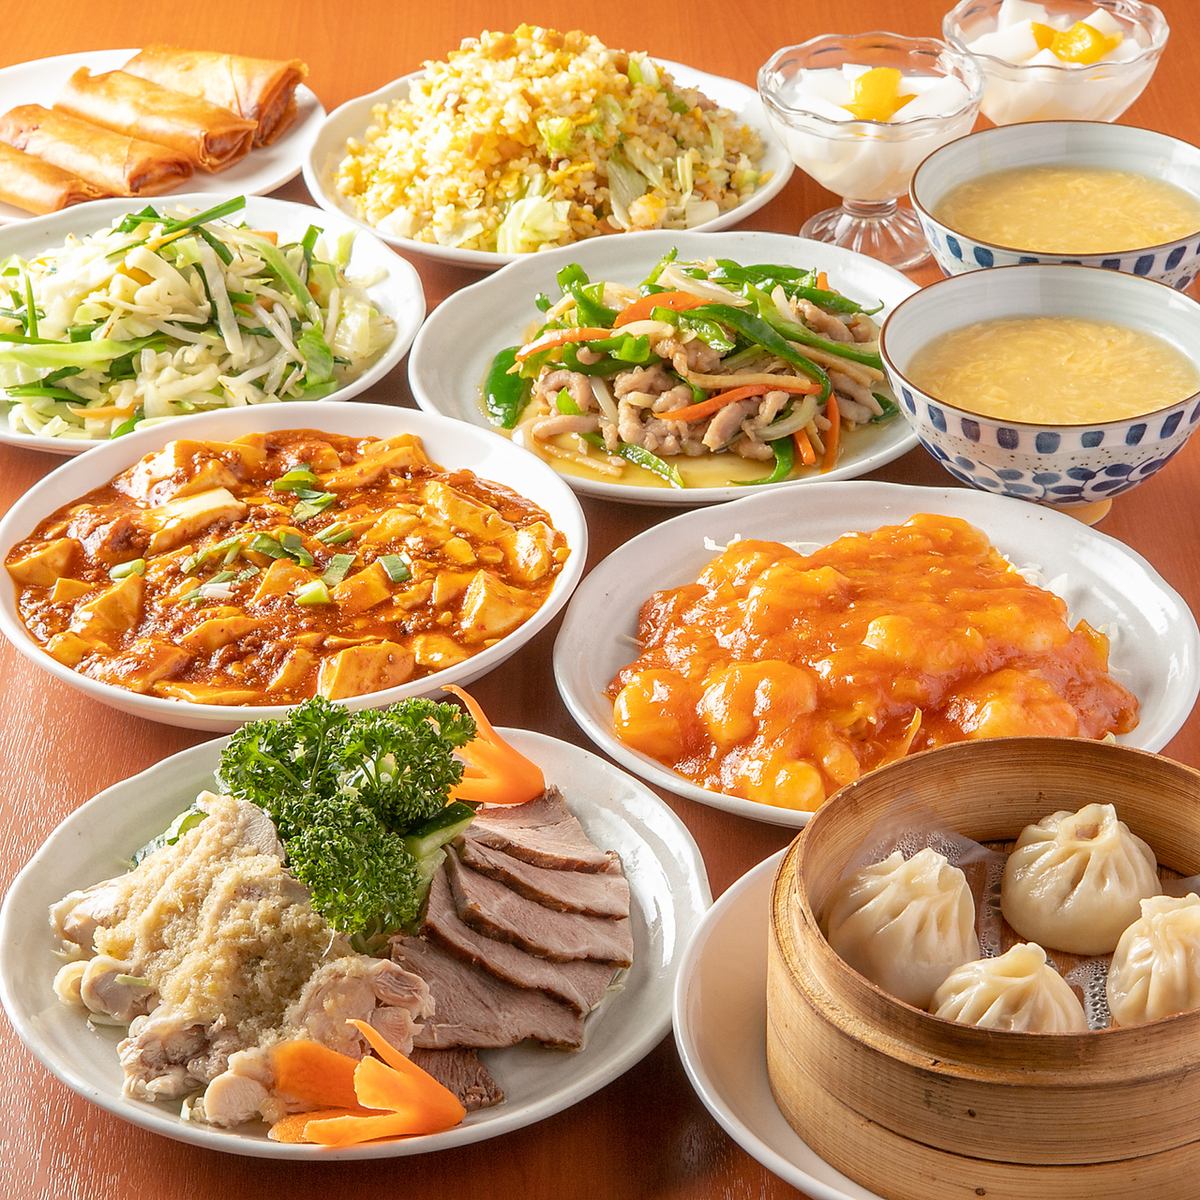 Enjoy all-you-can-eat / all-you-can-drink with Chinese food at a reasonable price ♪